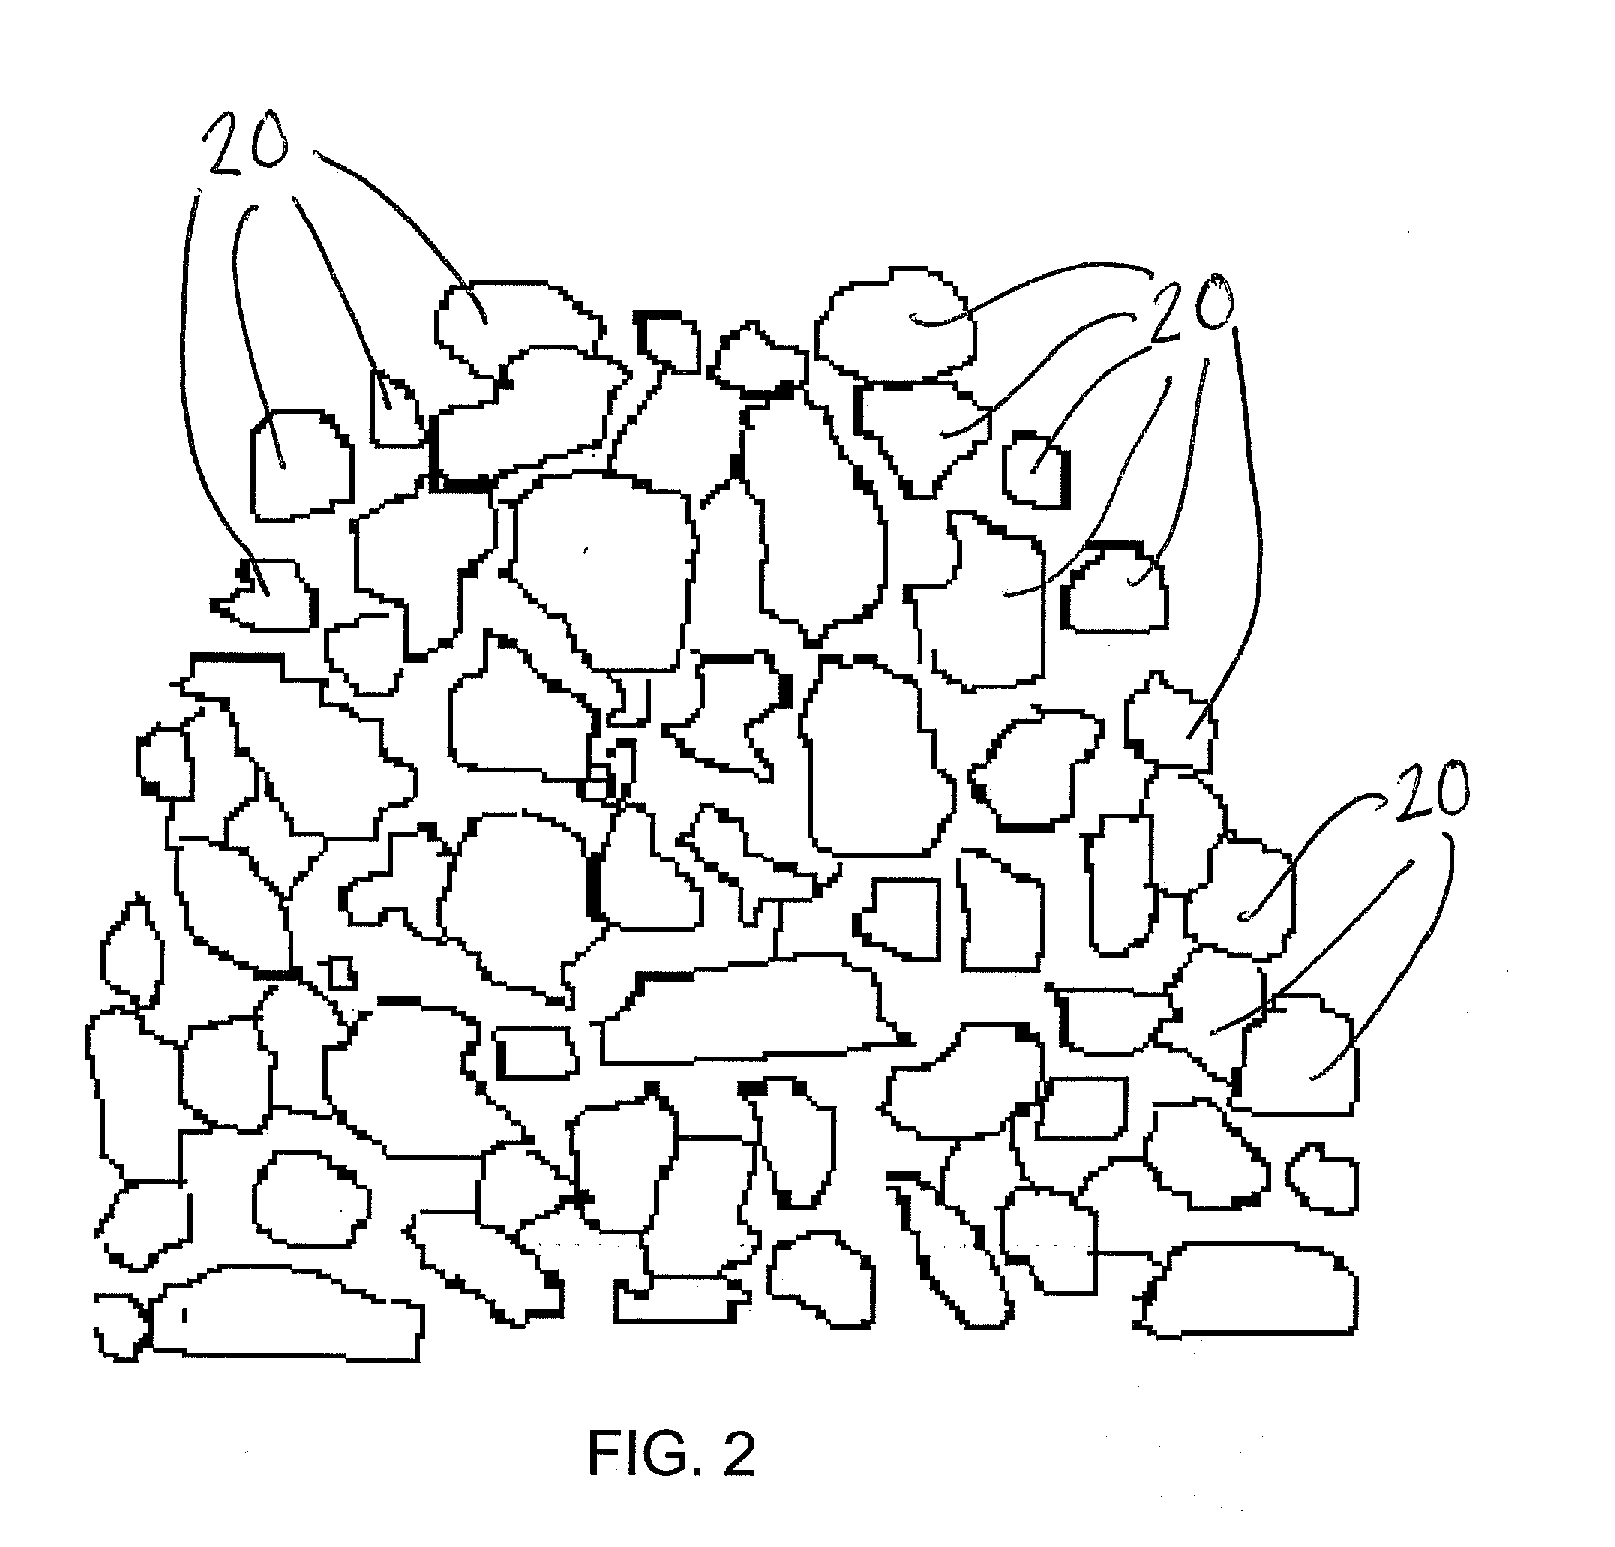 Soil neutralization product and method of making same